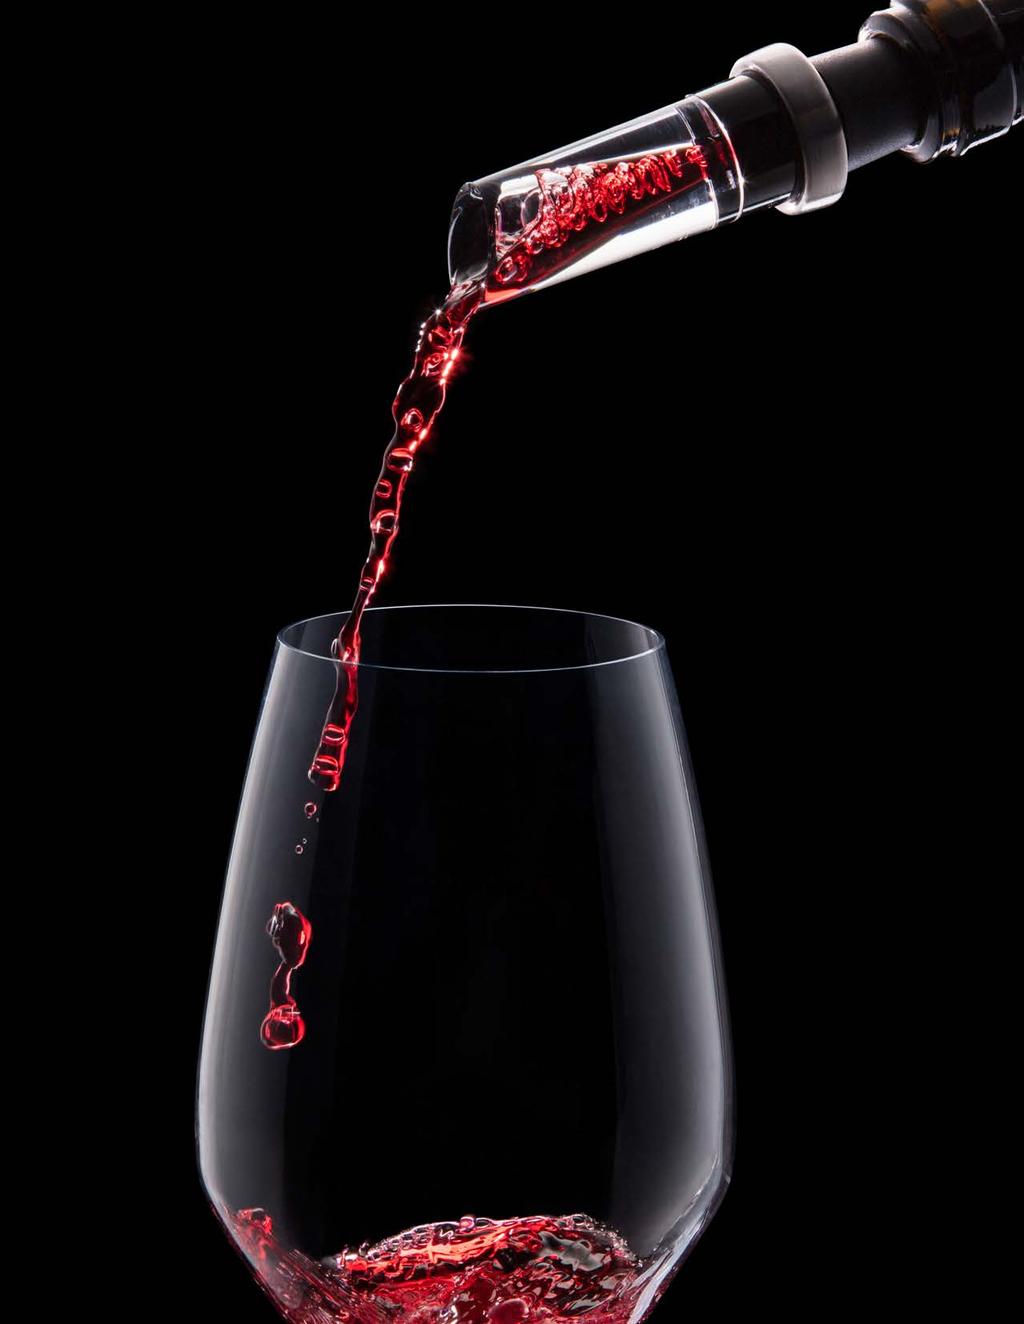 WHY AERATE? Why aerate? Exposing wine to air creates oxidation and evaporation.